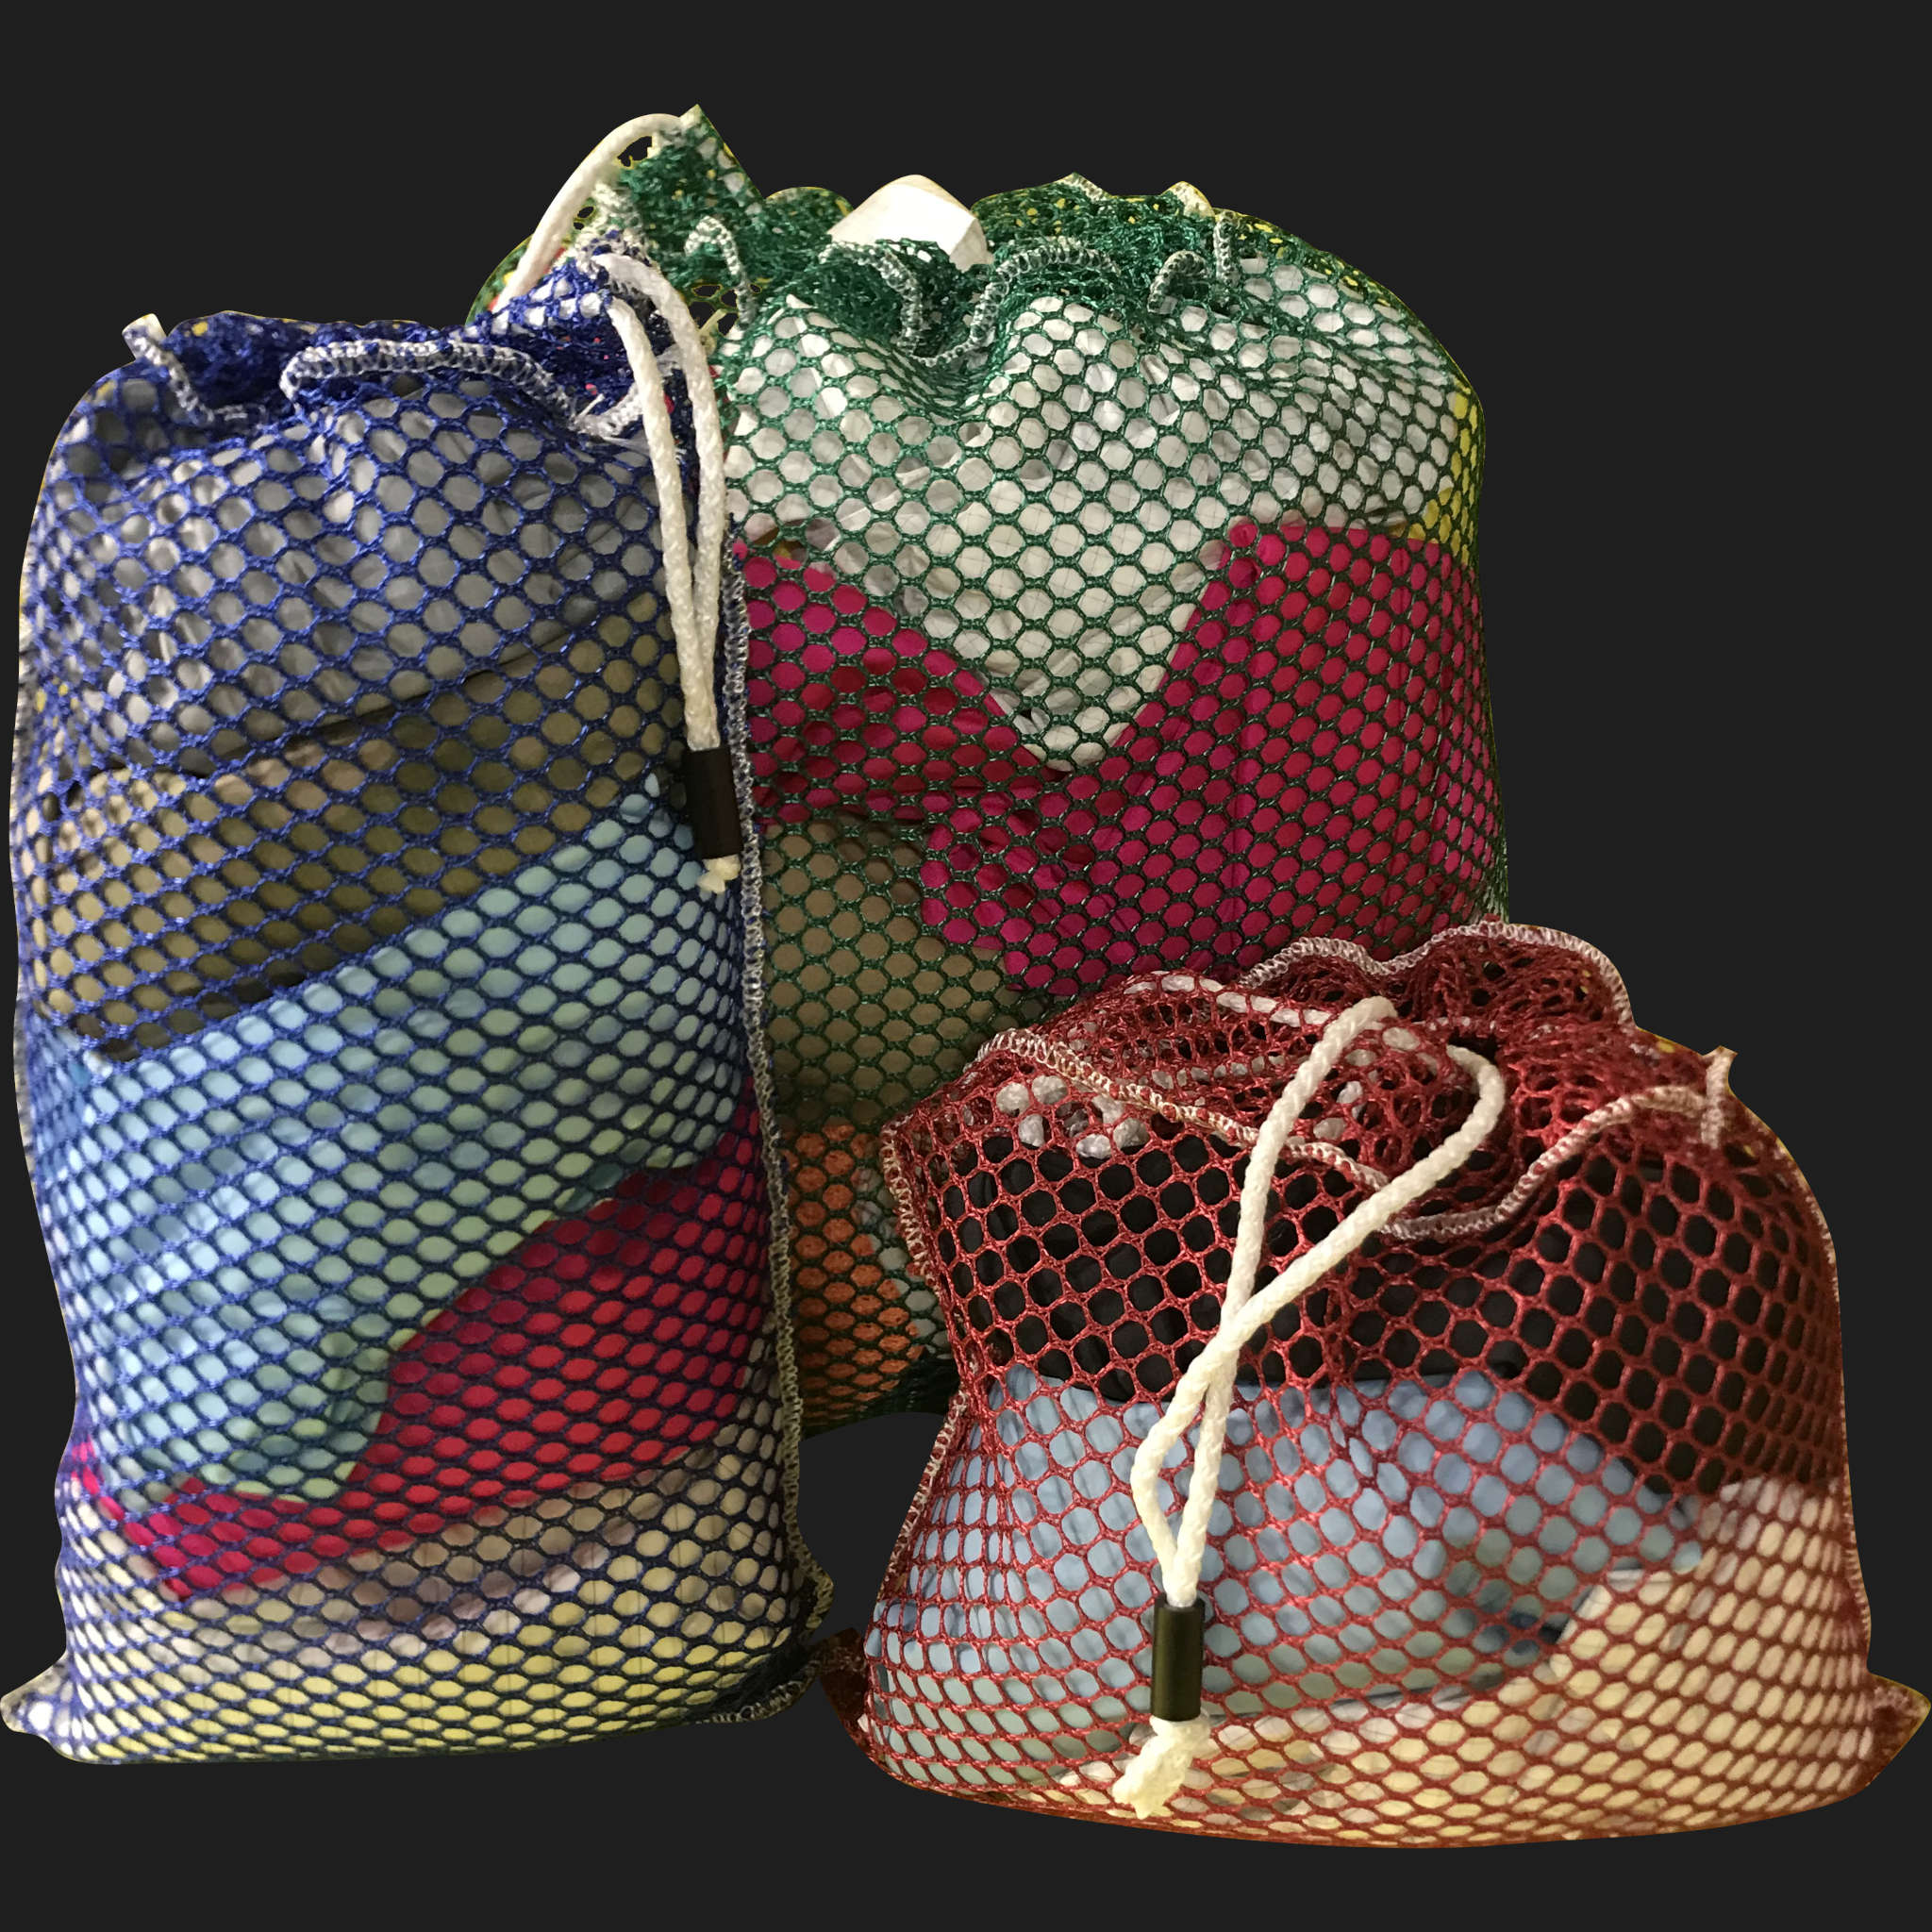 28" x 36" Customized Mesh-Net-Laundry Bags Heavy Duty with Cord and barrellock closure